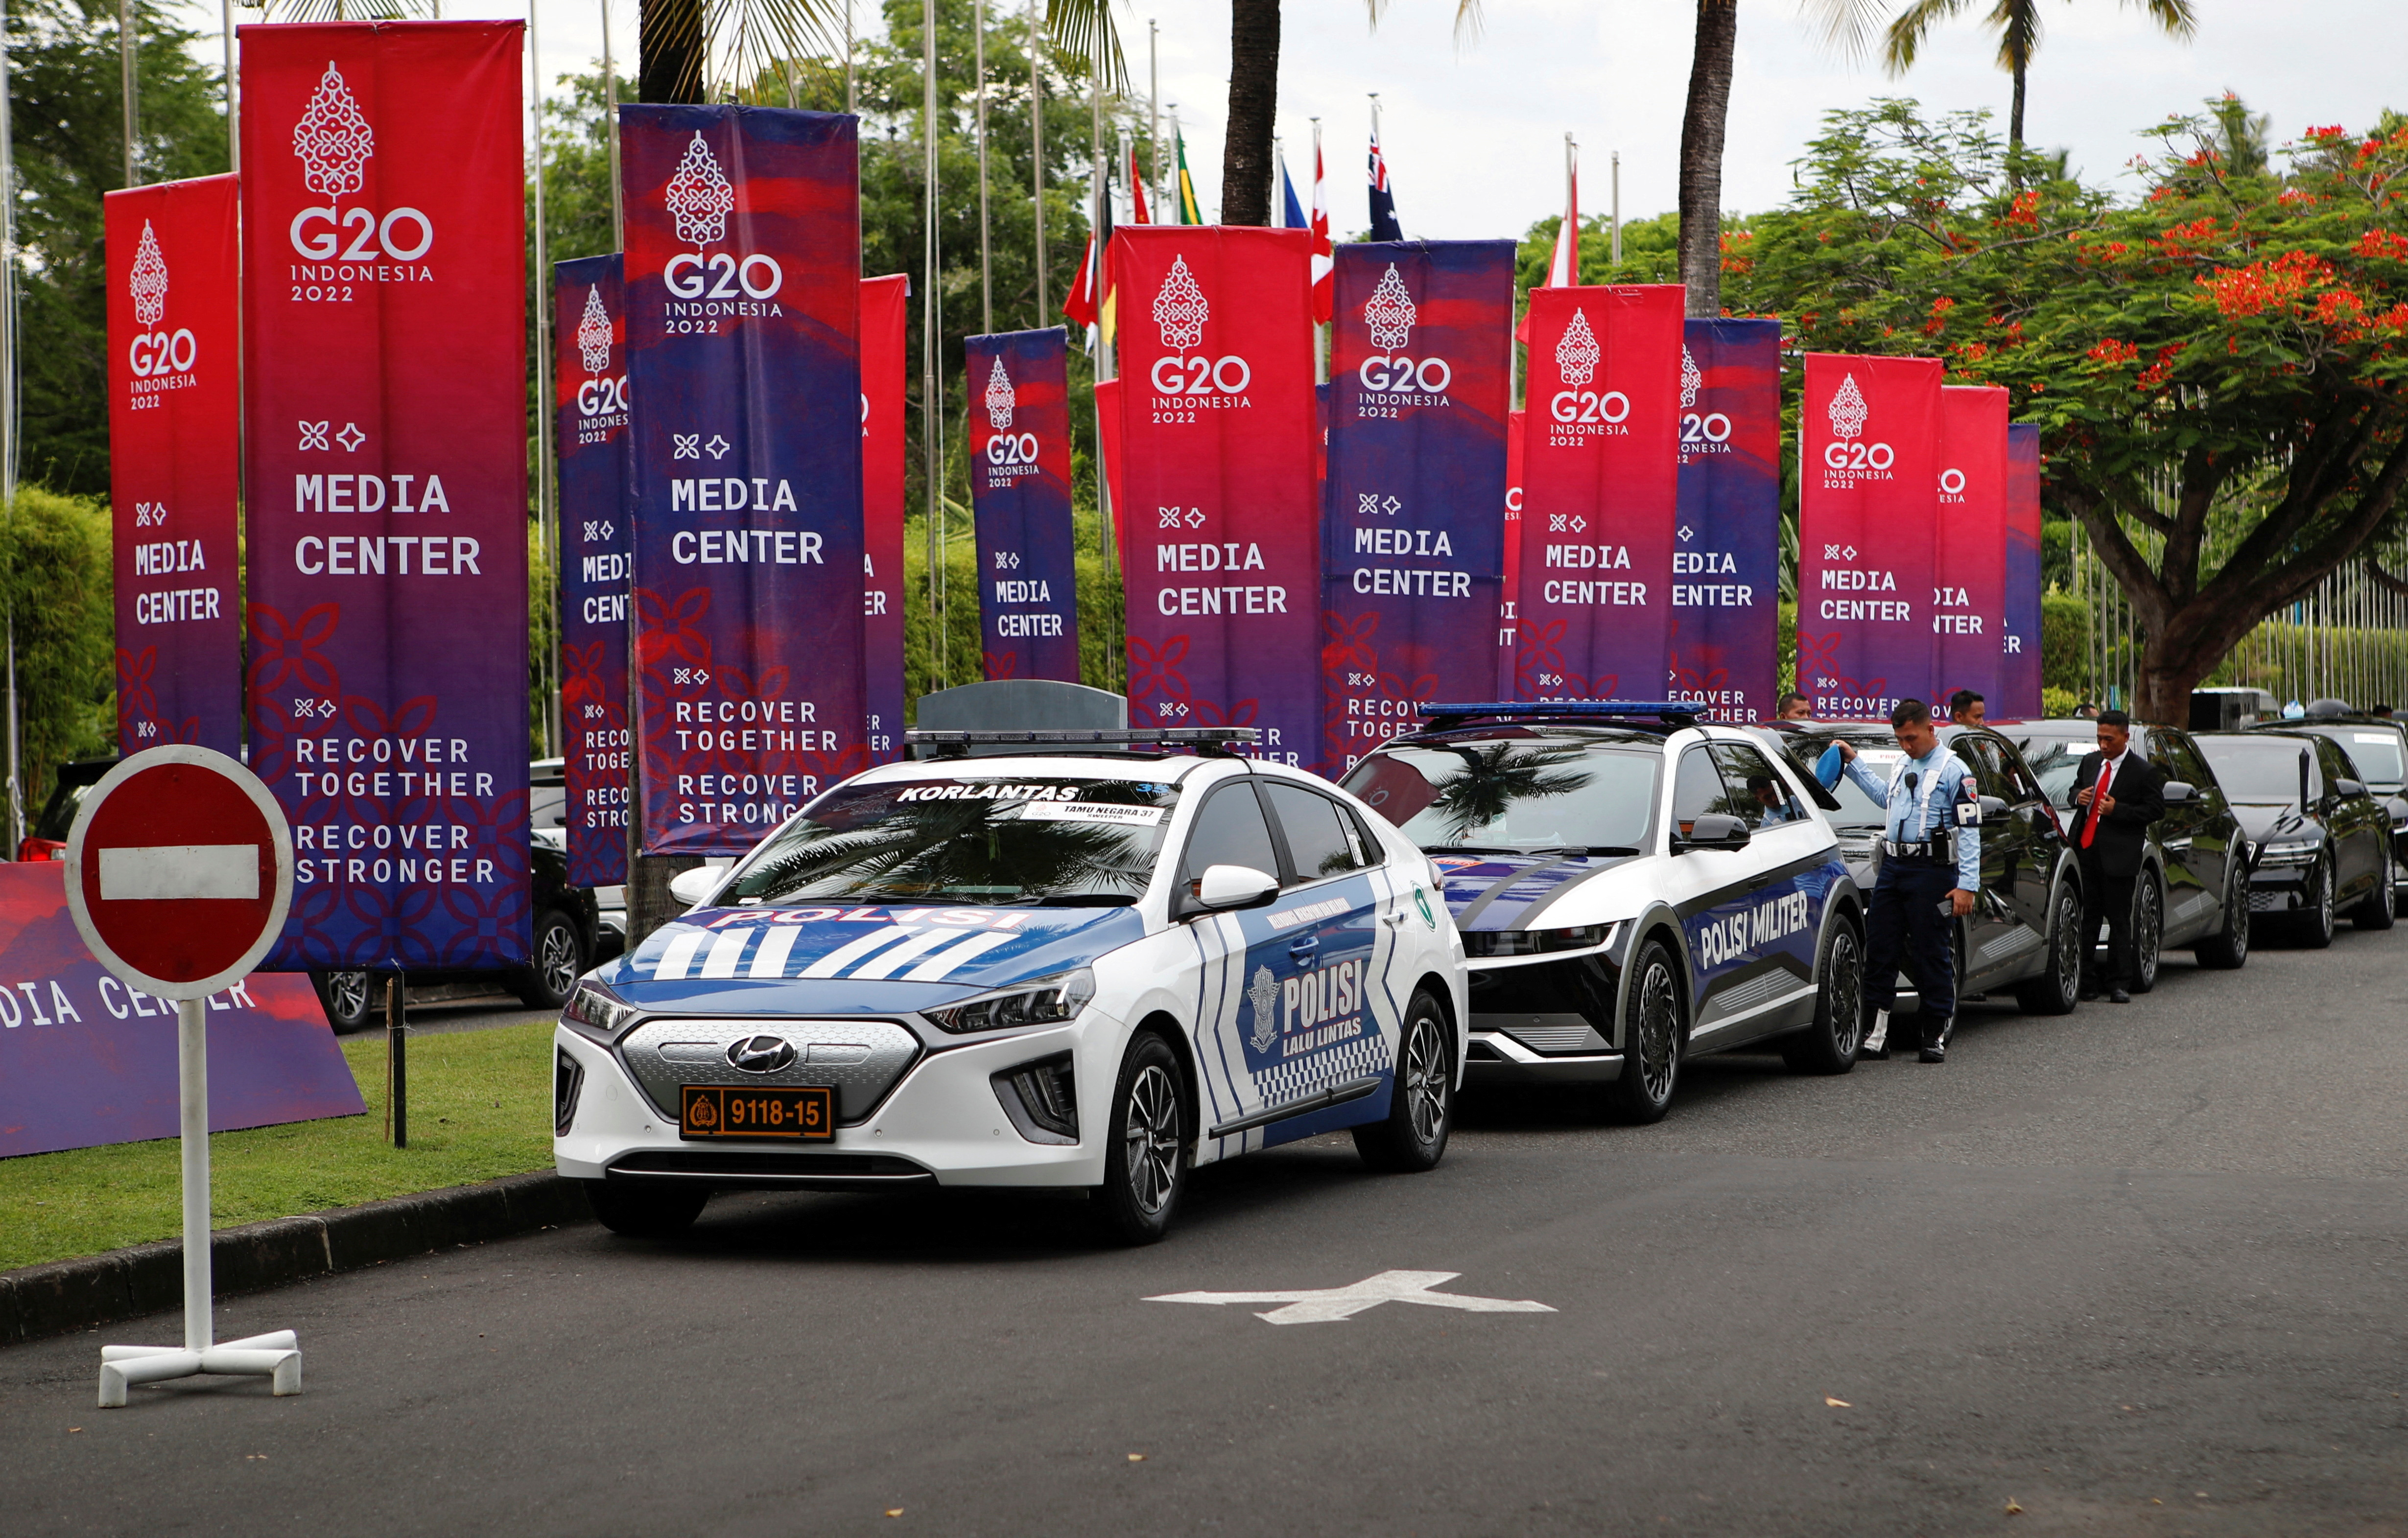 Electric cars park at the entrance of the venue ahead of the G20 summit in Nusa Dua